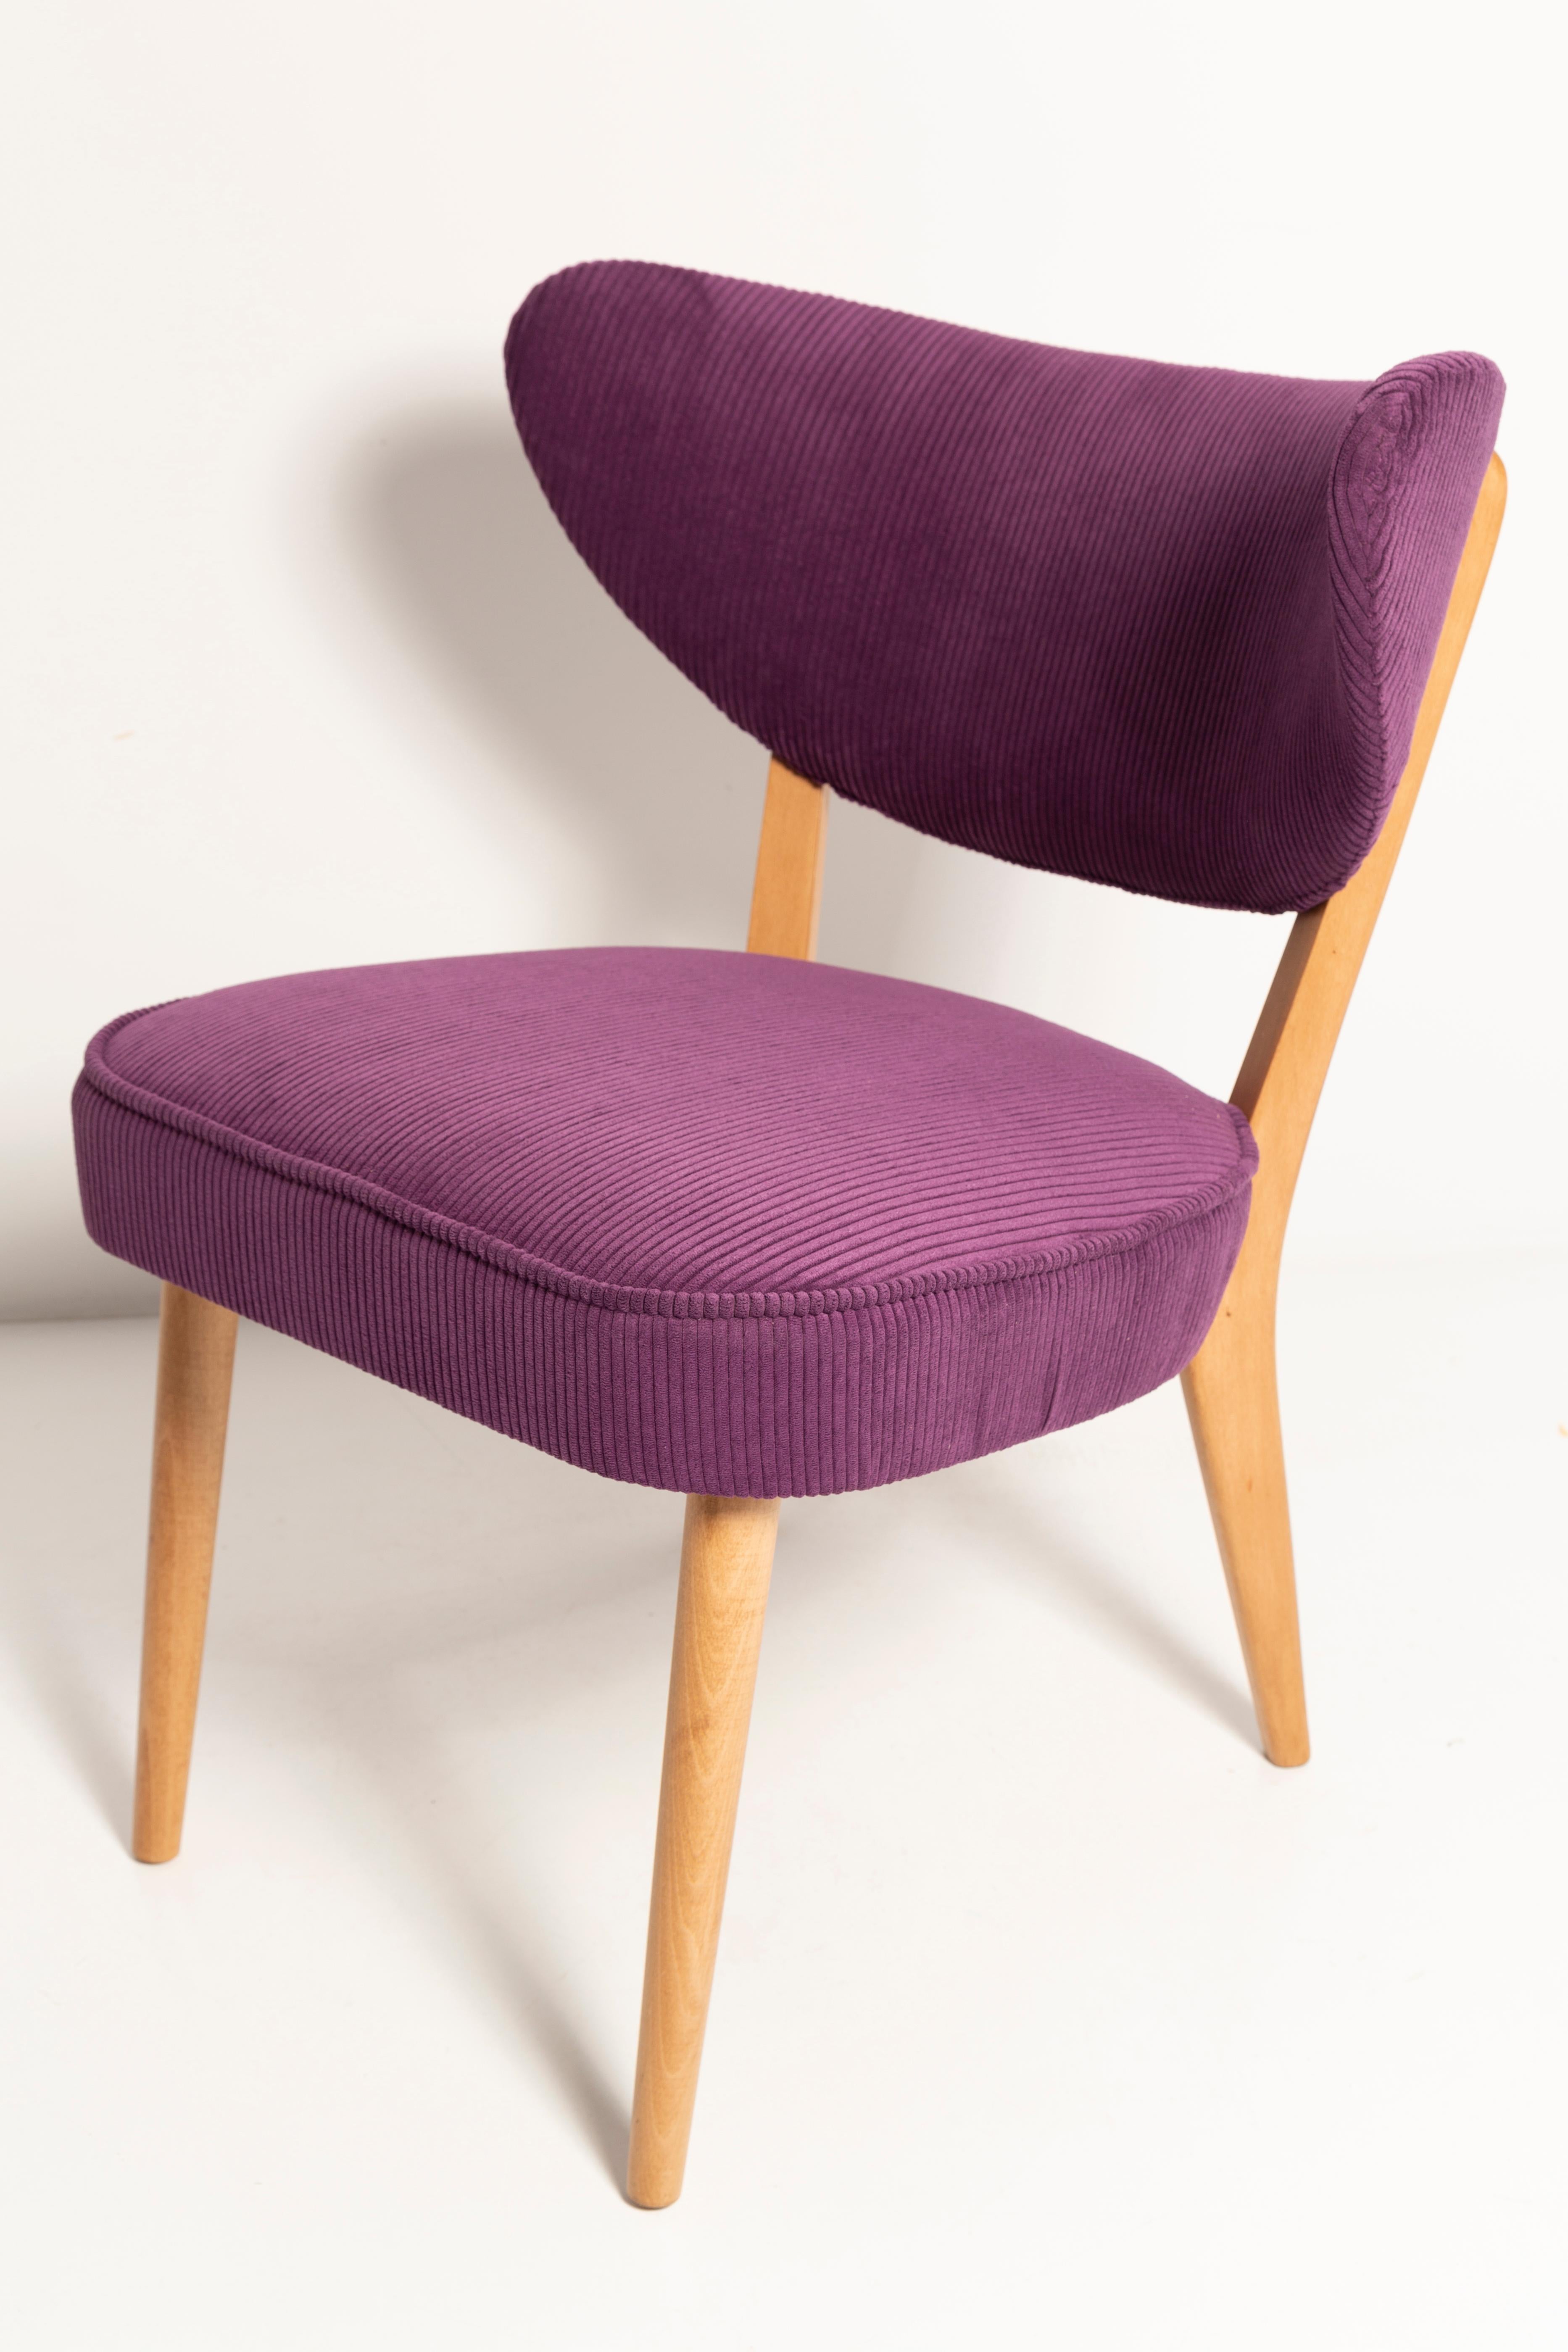 Midcentury Style Violet Velvet Club Chair, by Vintola Studio, Europe, Poland For Sale 3